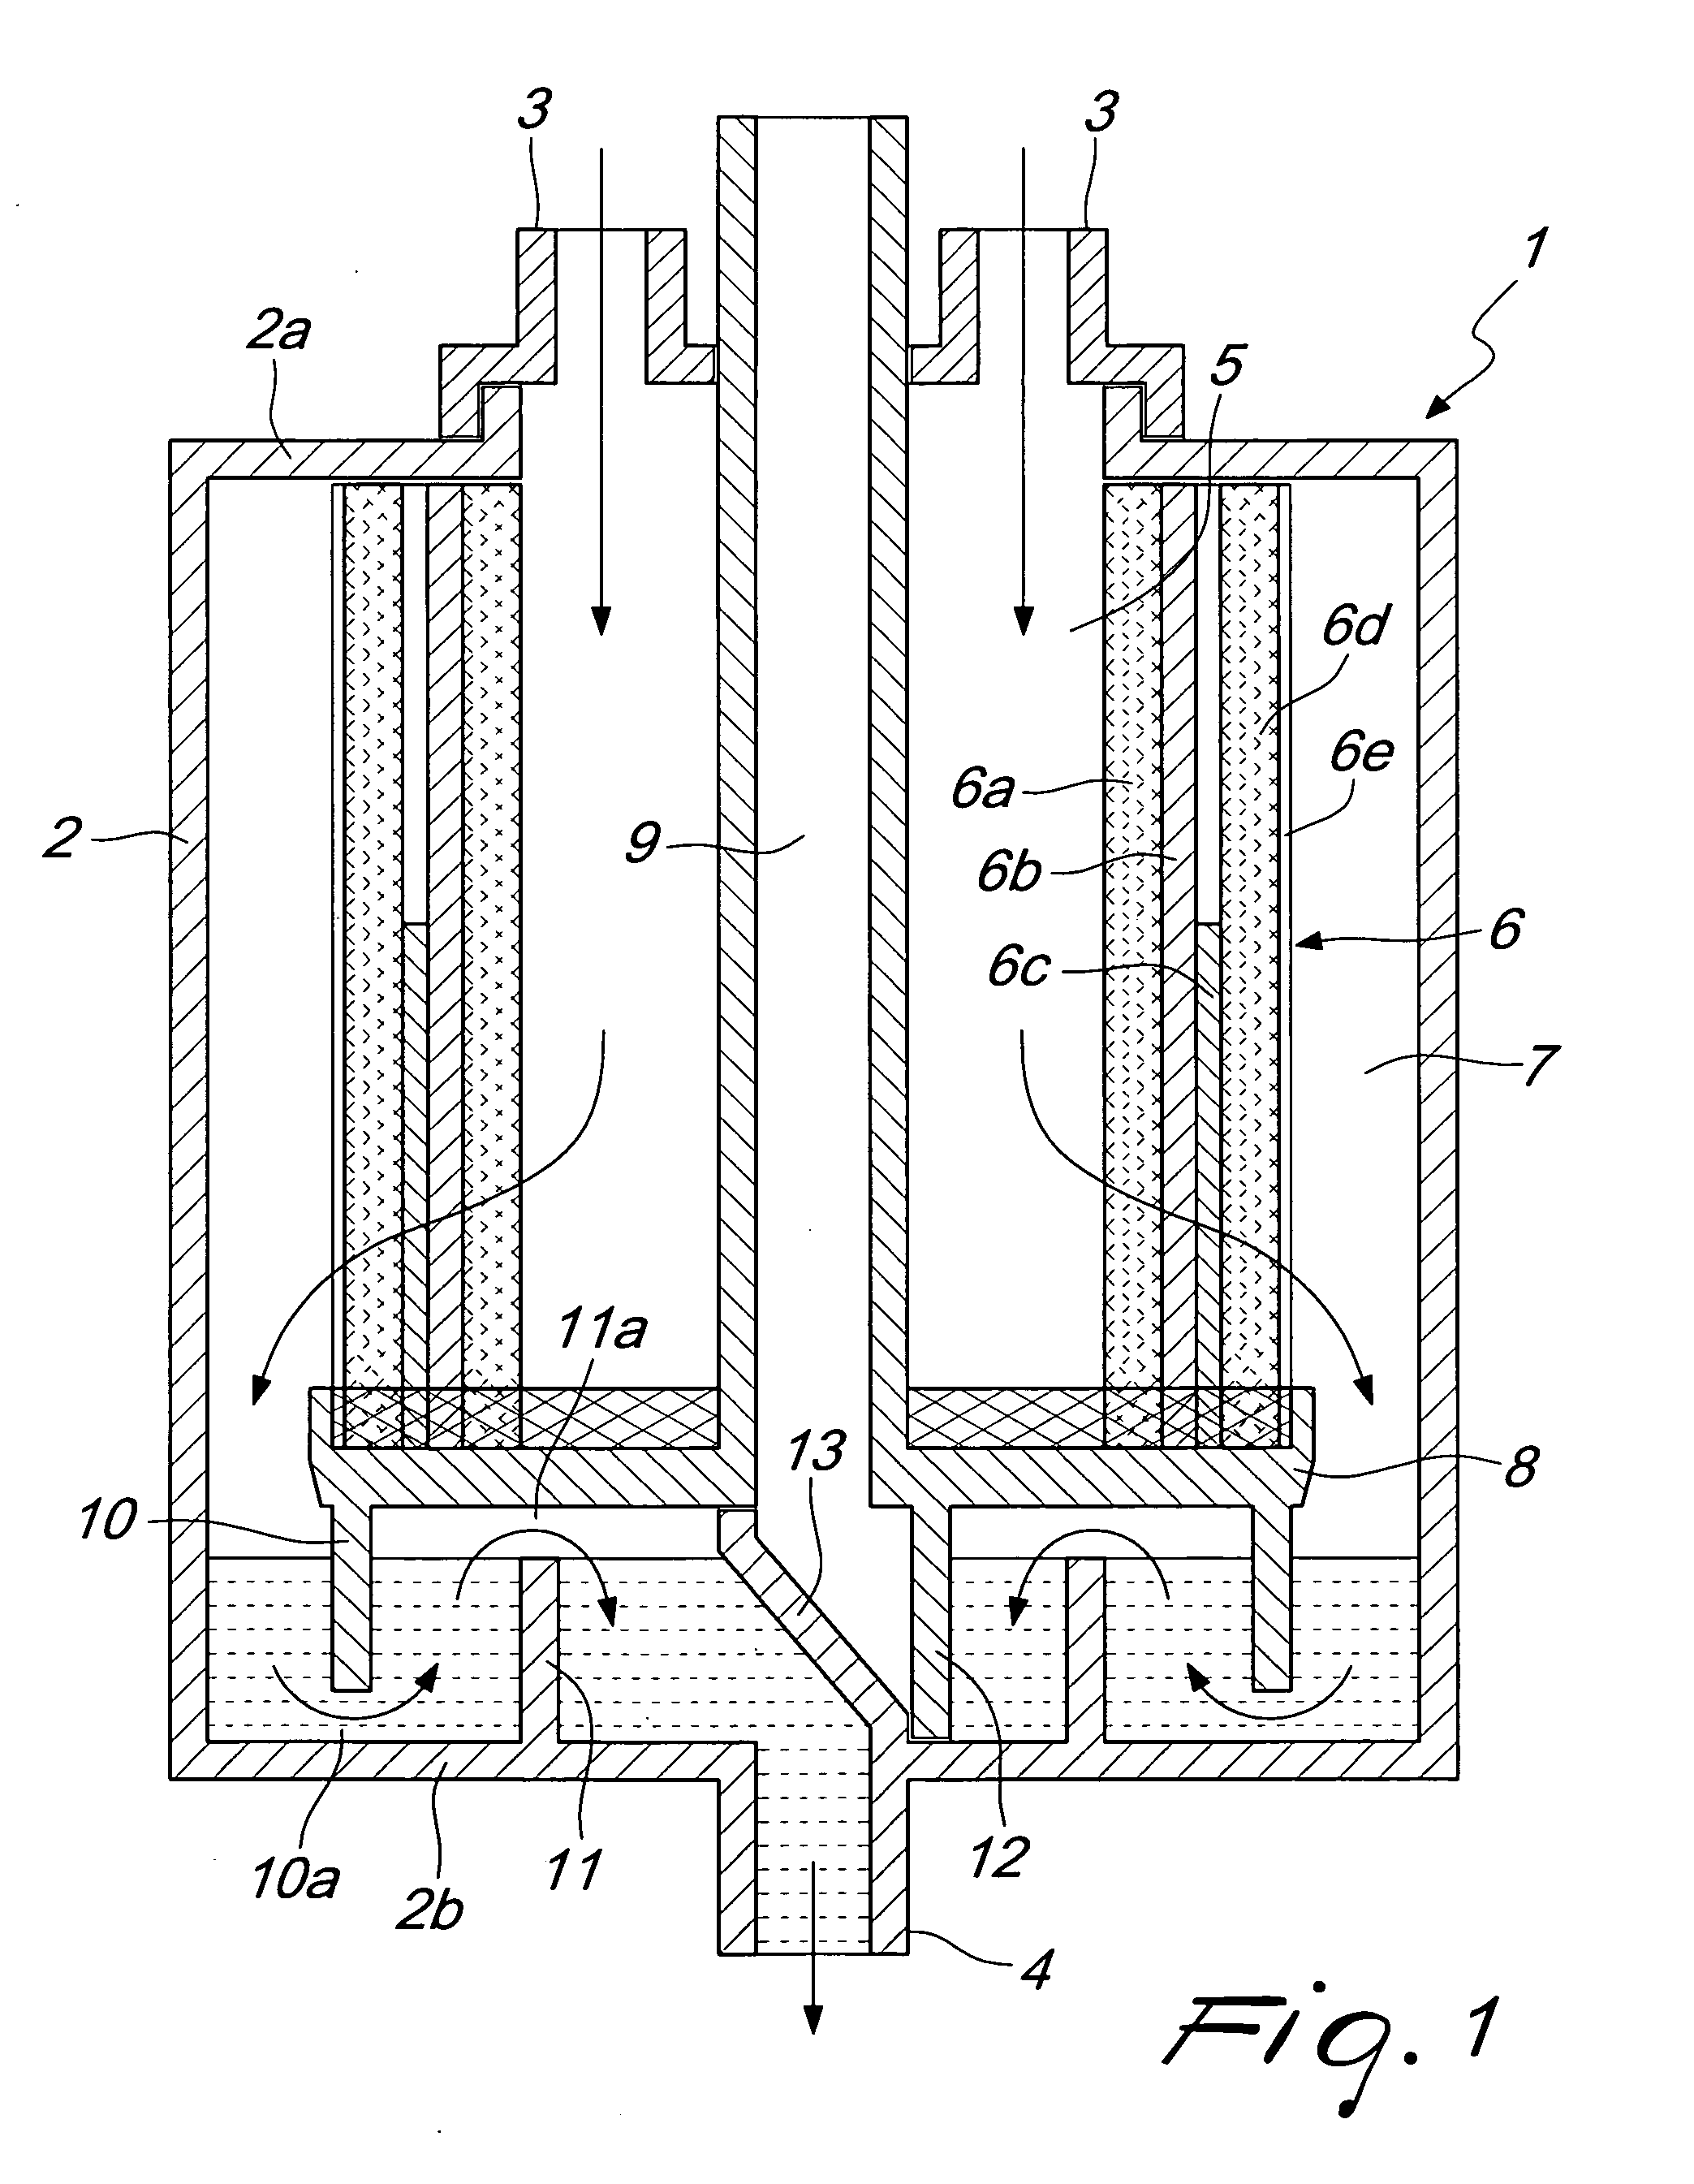 Cardiotomy reservoir with blood inflow and outflow connectors located for optimizing operation